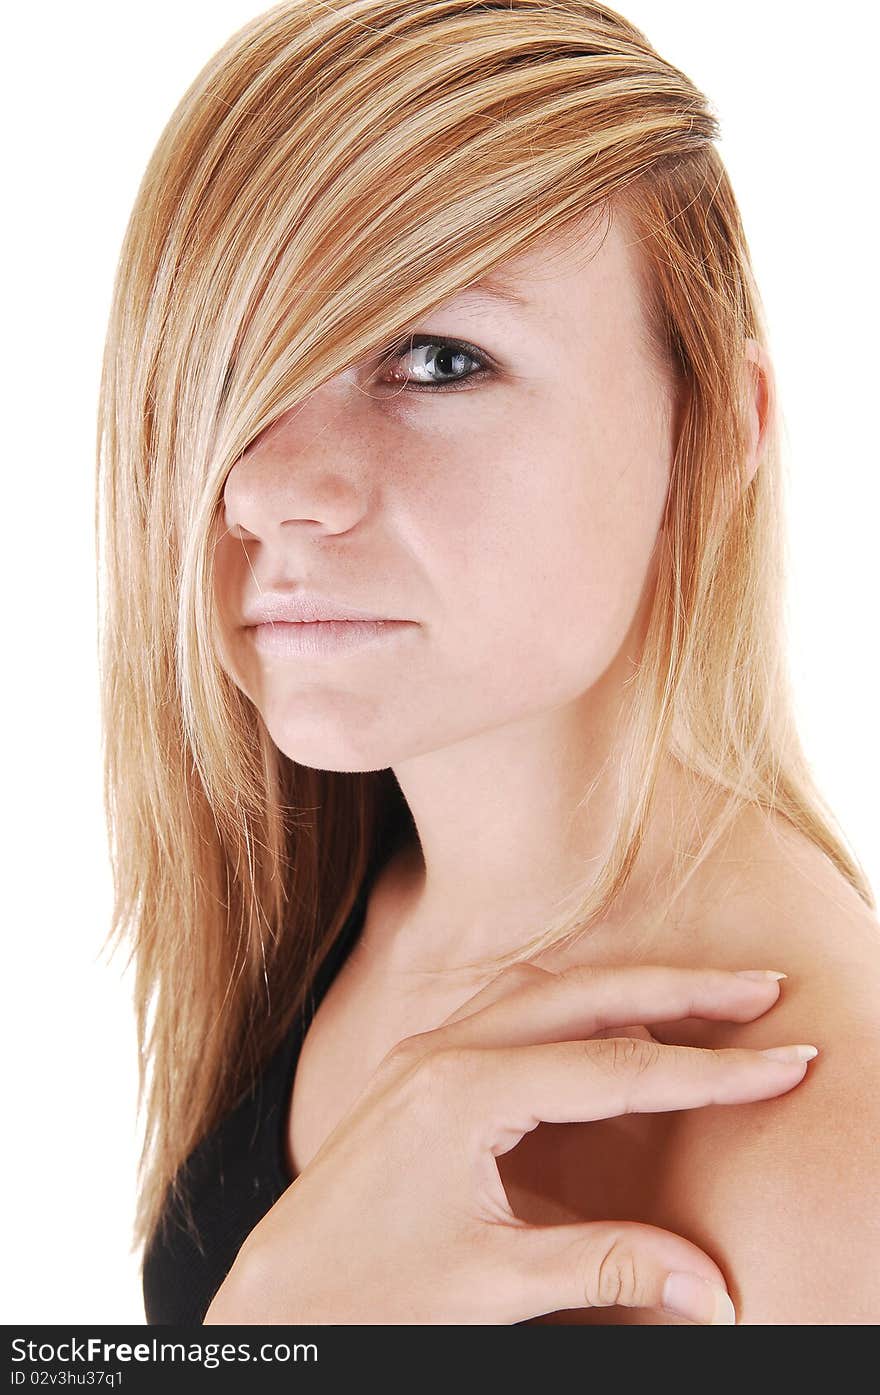 A closeup face shoot of a young blond woman, one eye covert from
her hair, looking into the camera on white background. A closeup face shoot of a young blond woman, one eye covert from
her hair, looking into the camera on white background.